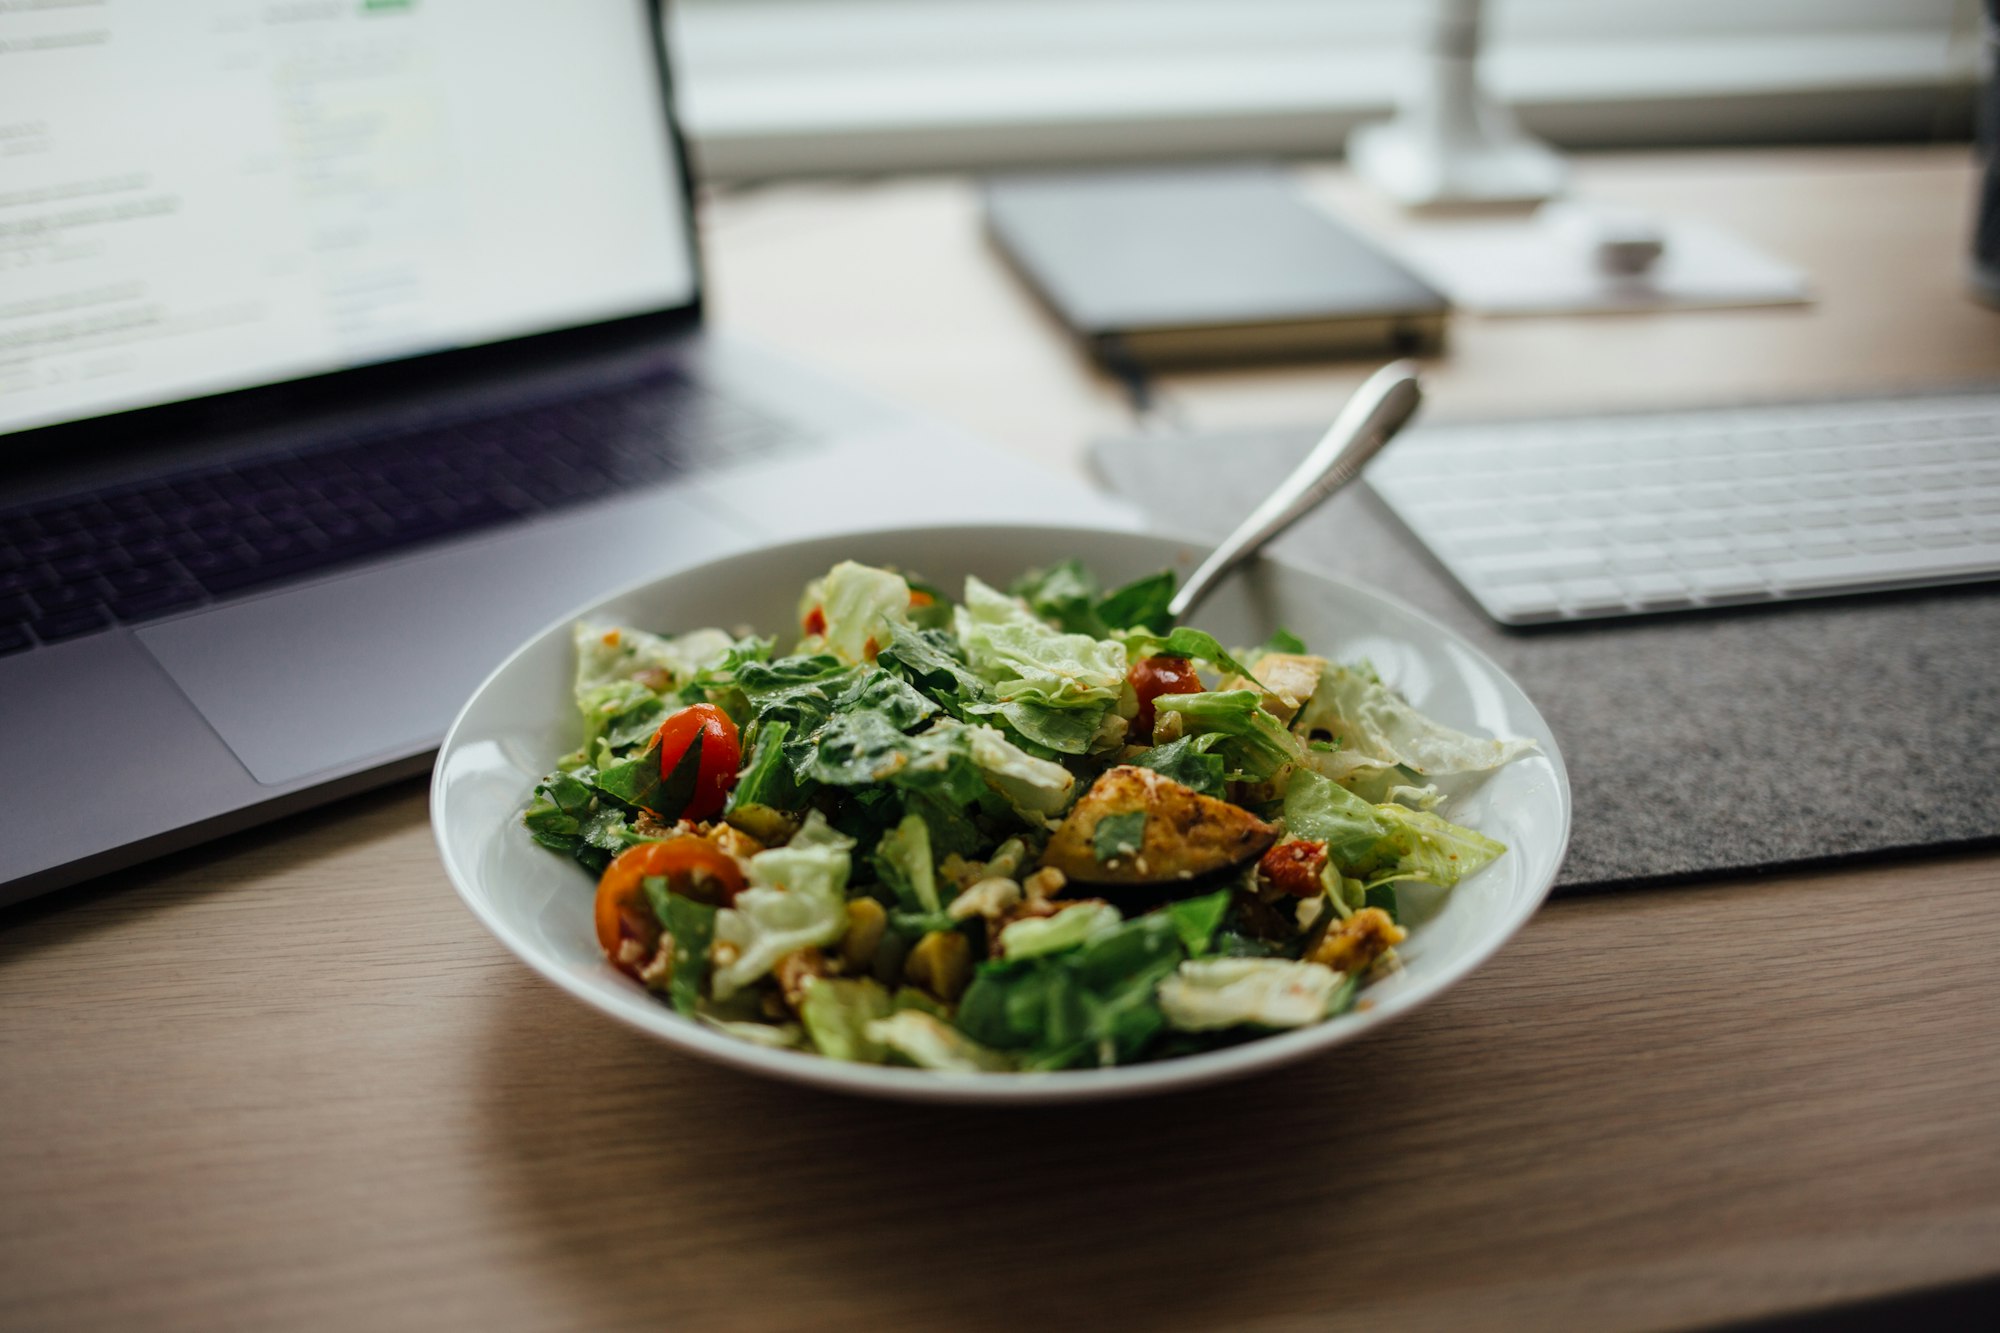 Food and drink - when working from home